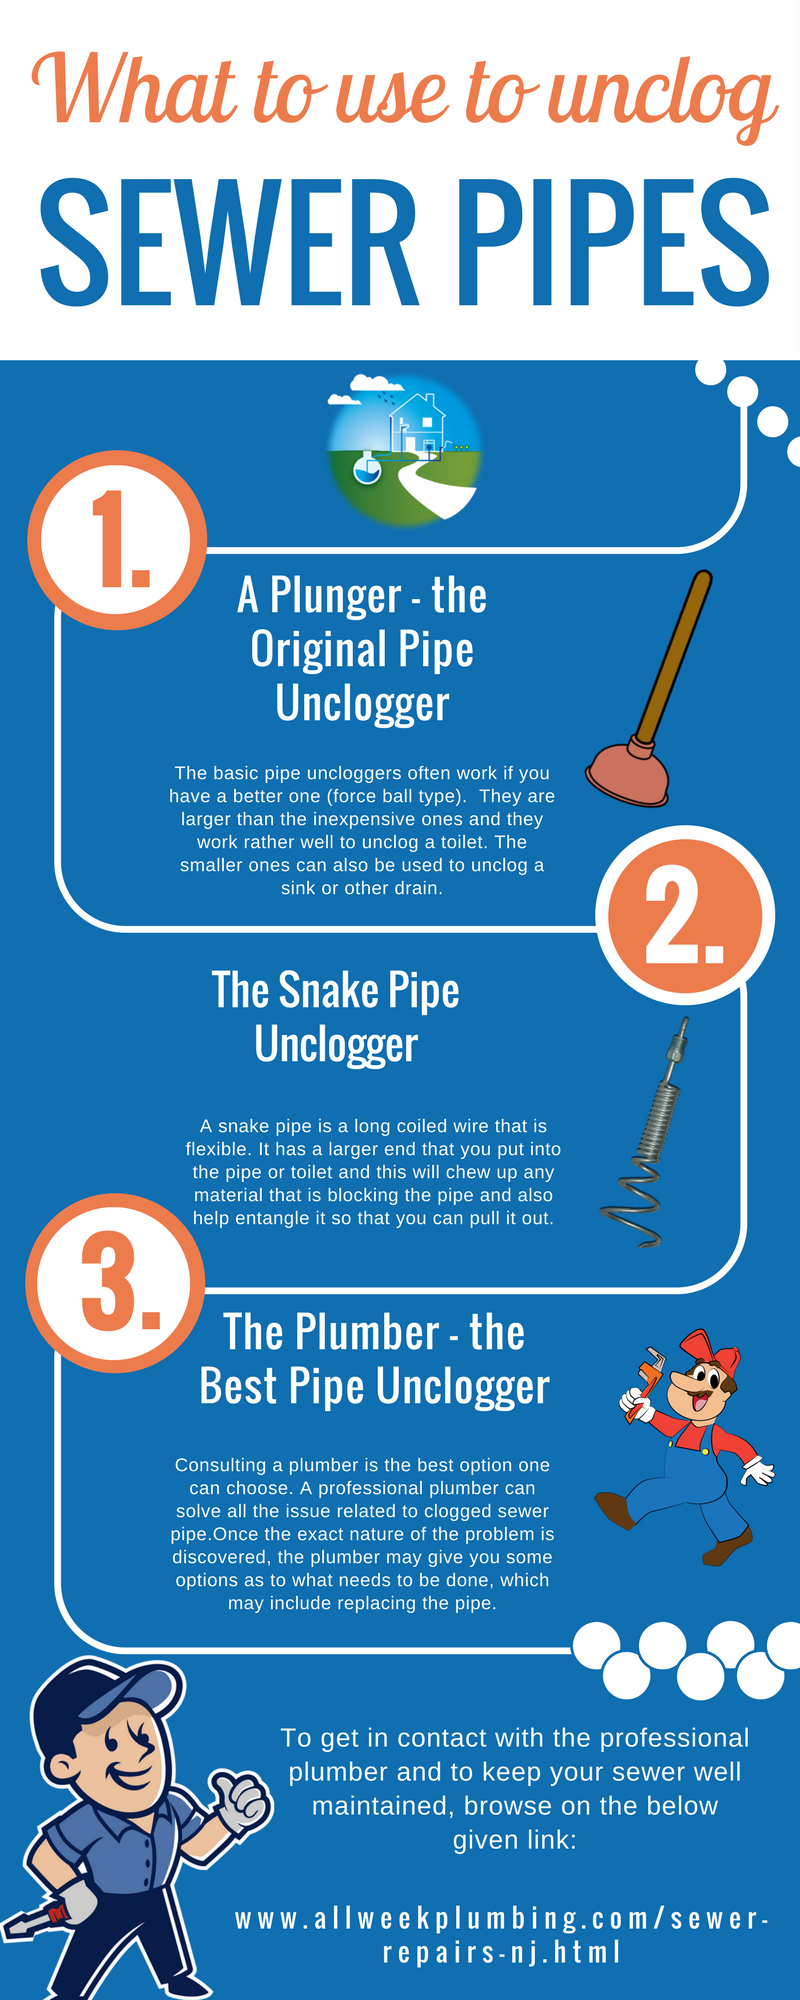 What To Use To Unclog Sewer Pipes